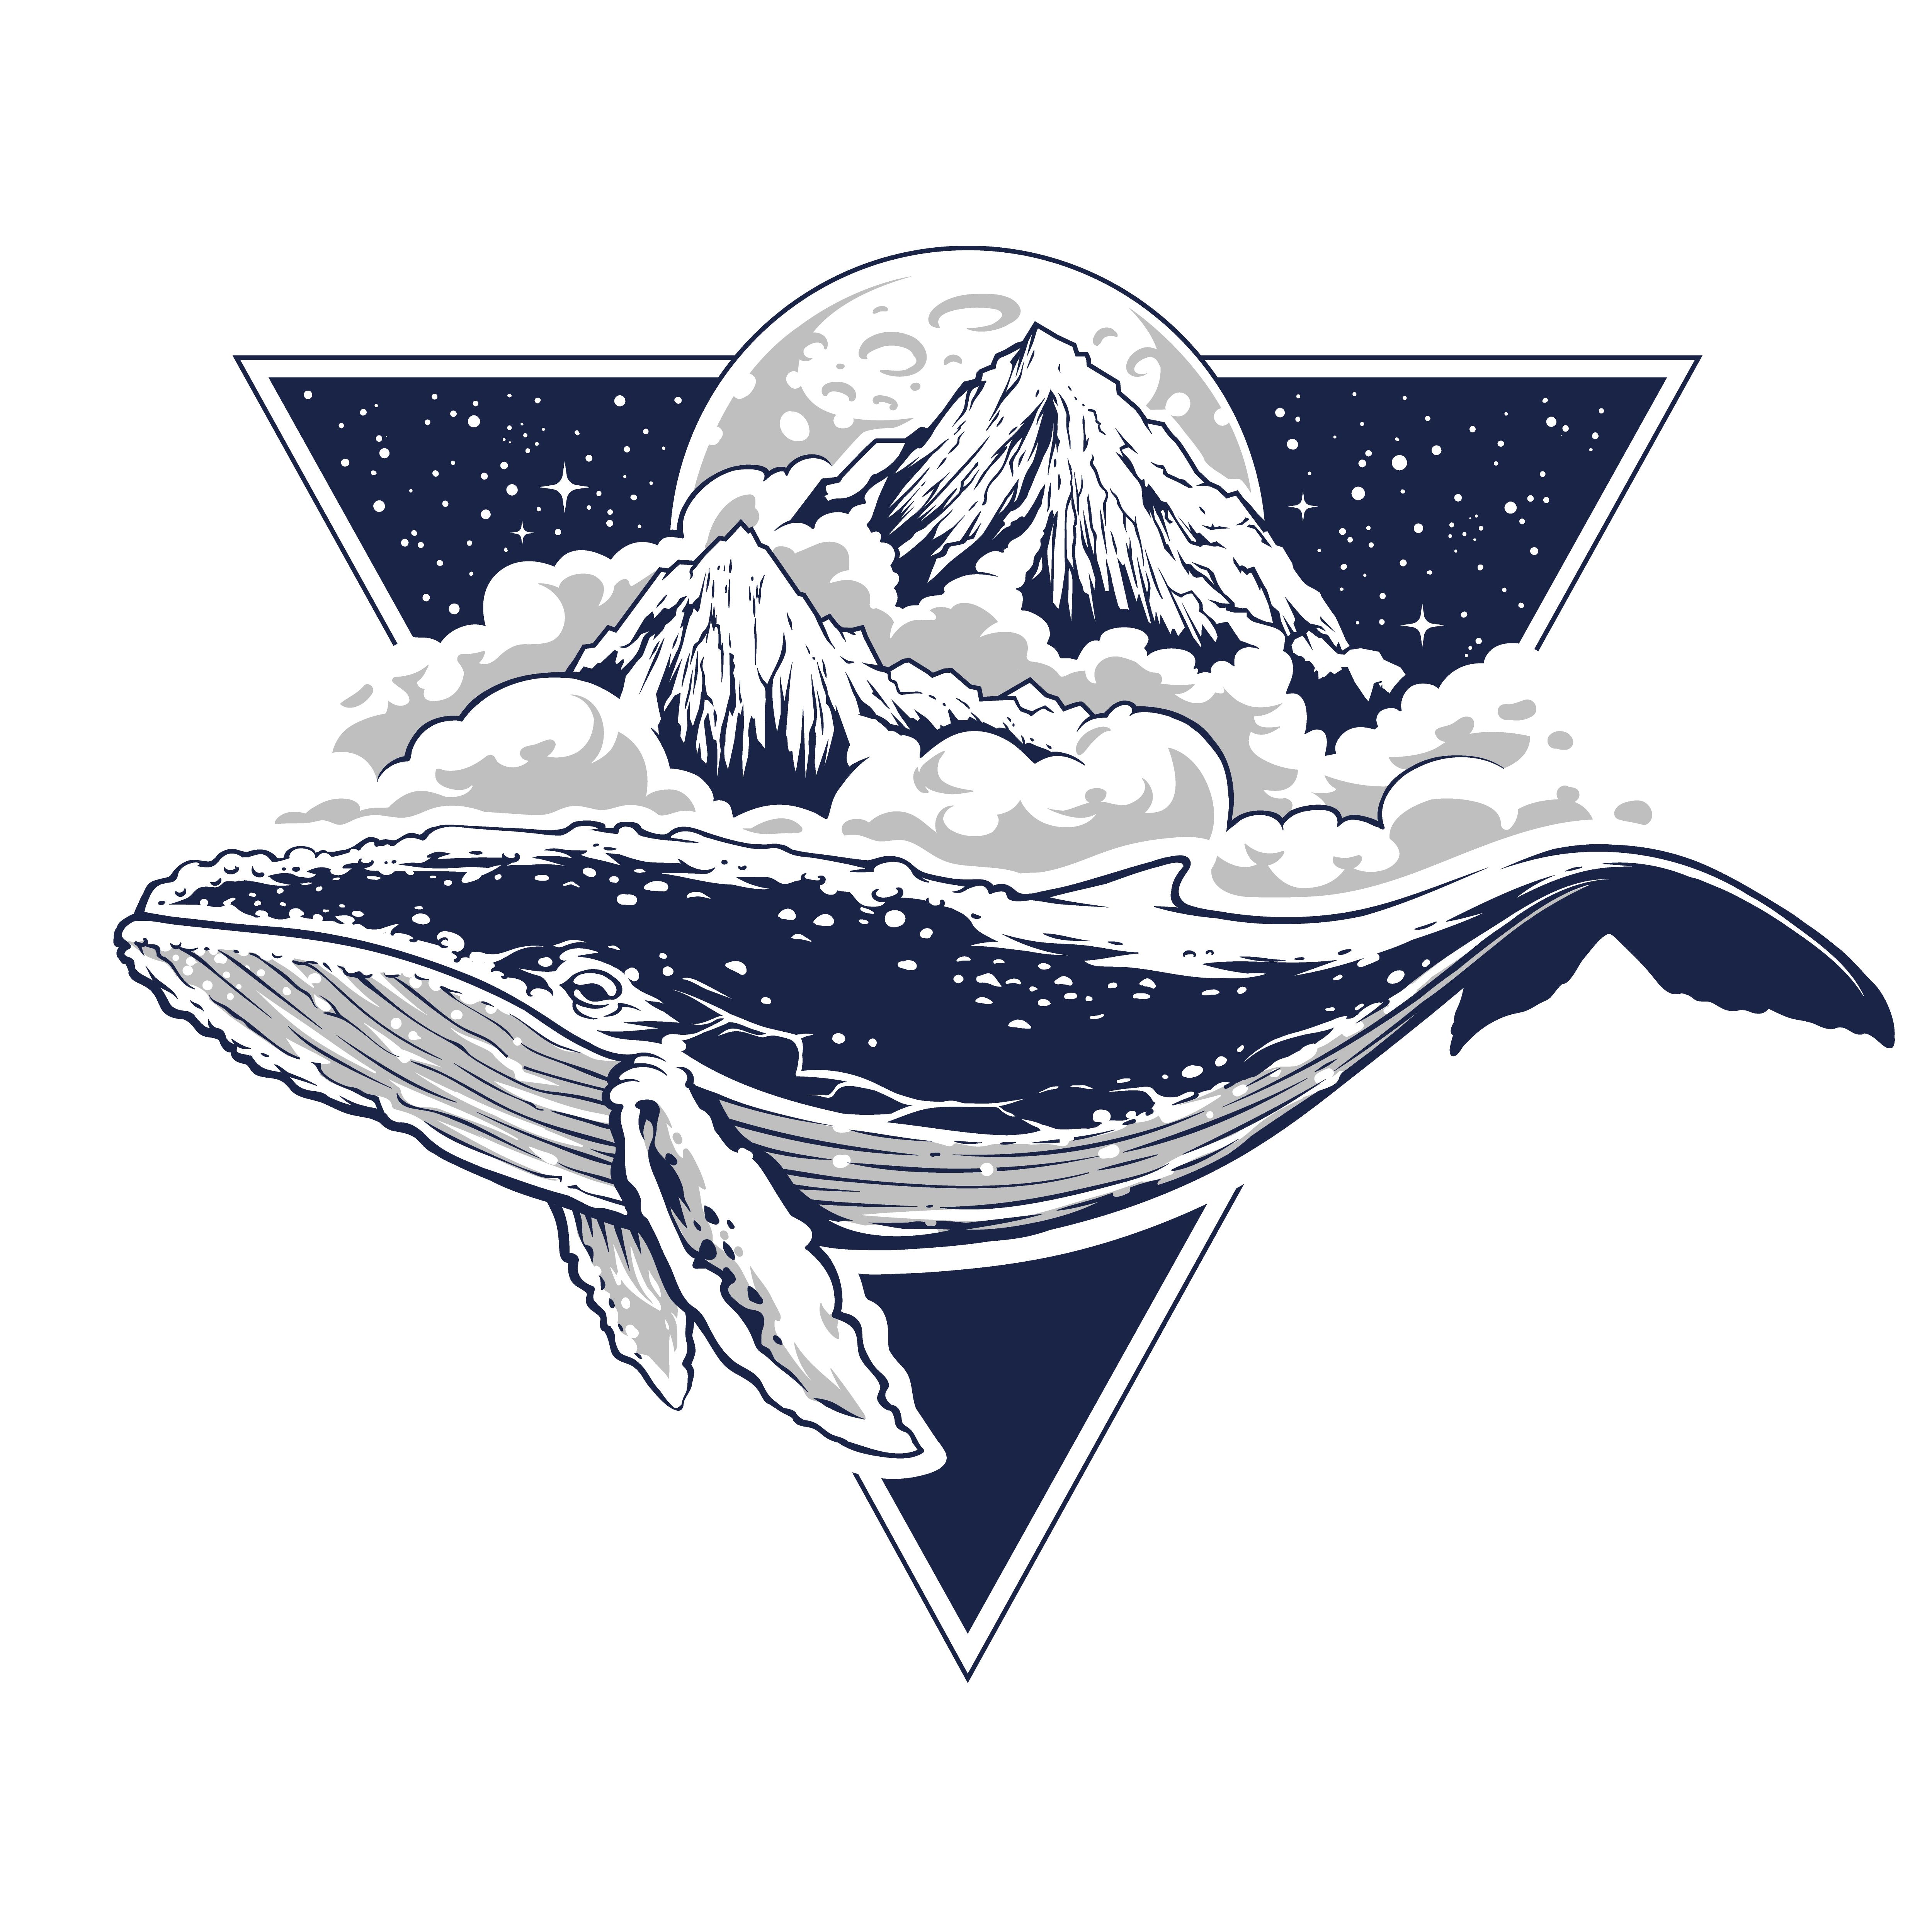 Whale Surreal Vector Art. Choose from thousands of free.